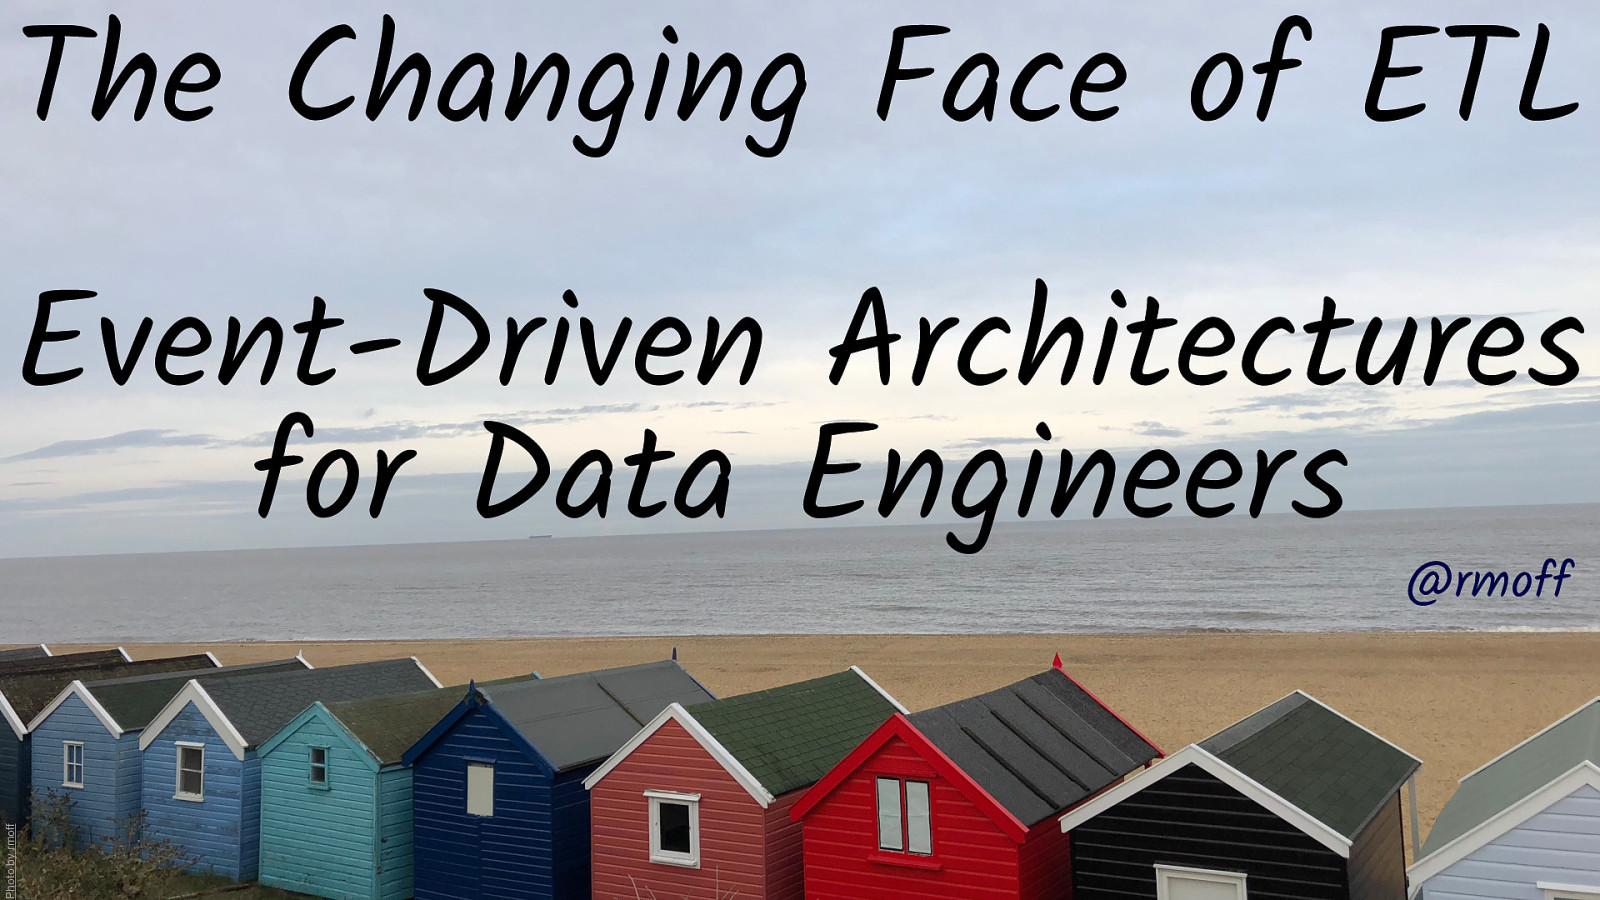 The Changing Face of ETL: Event-Driven Architectures for Data Engineers